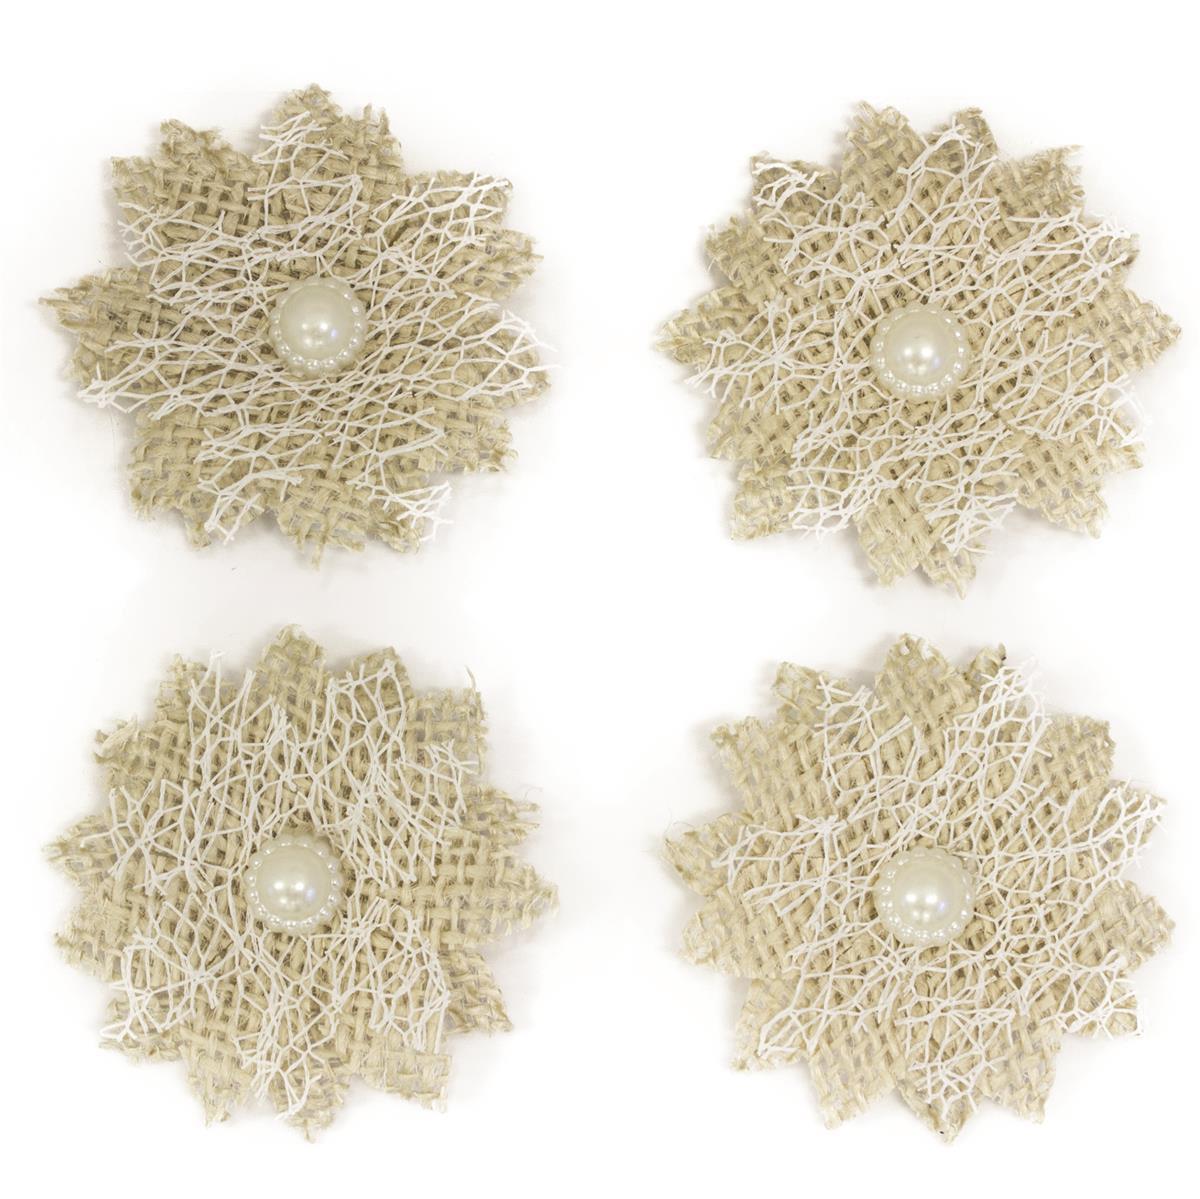 Fabric flowers Lace